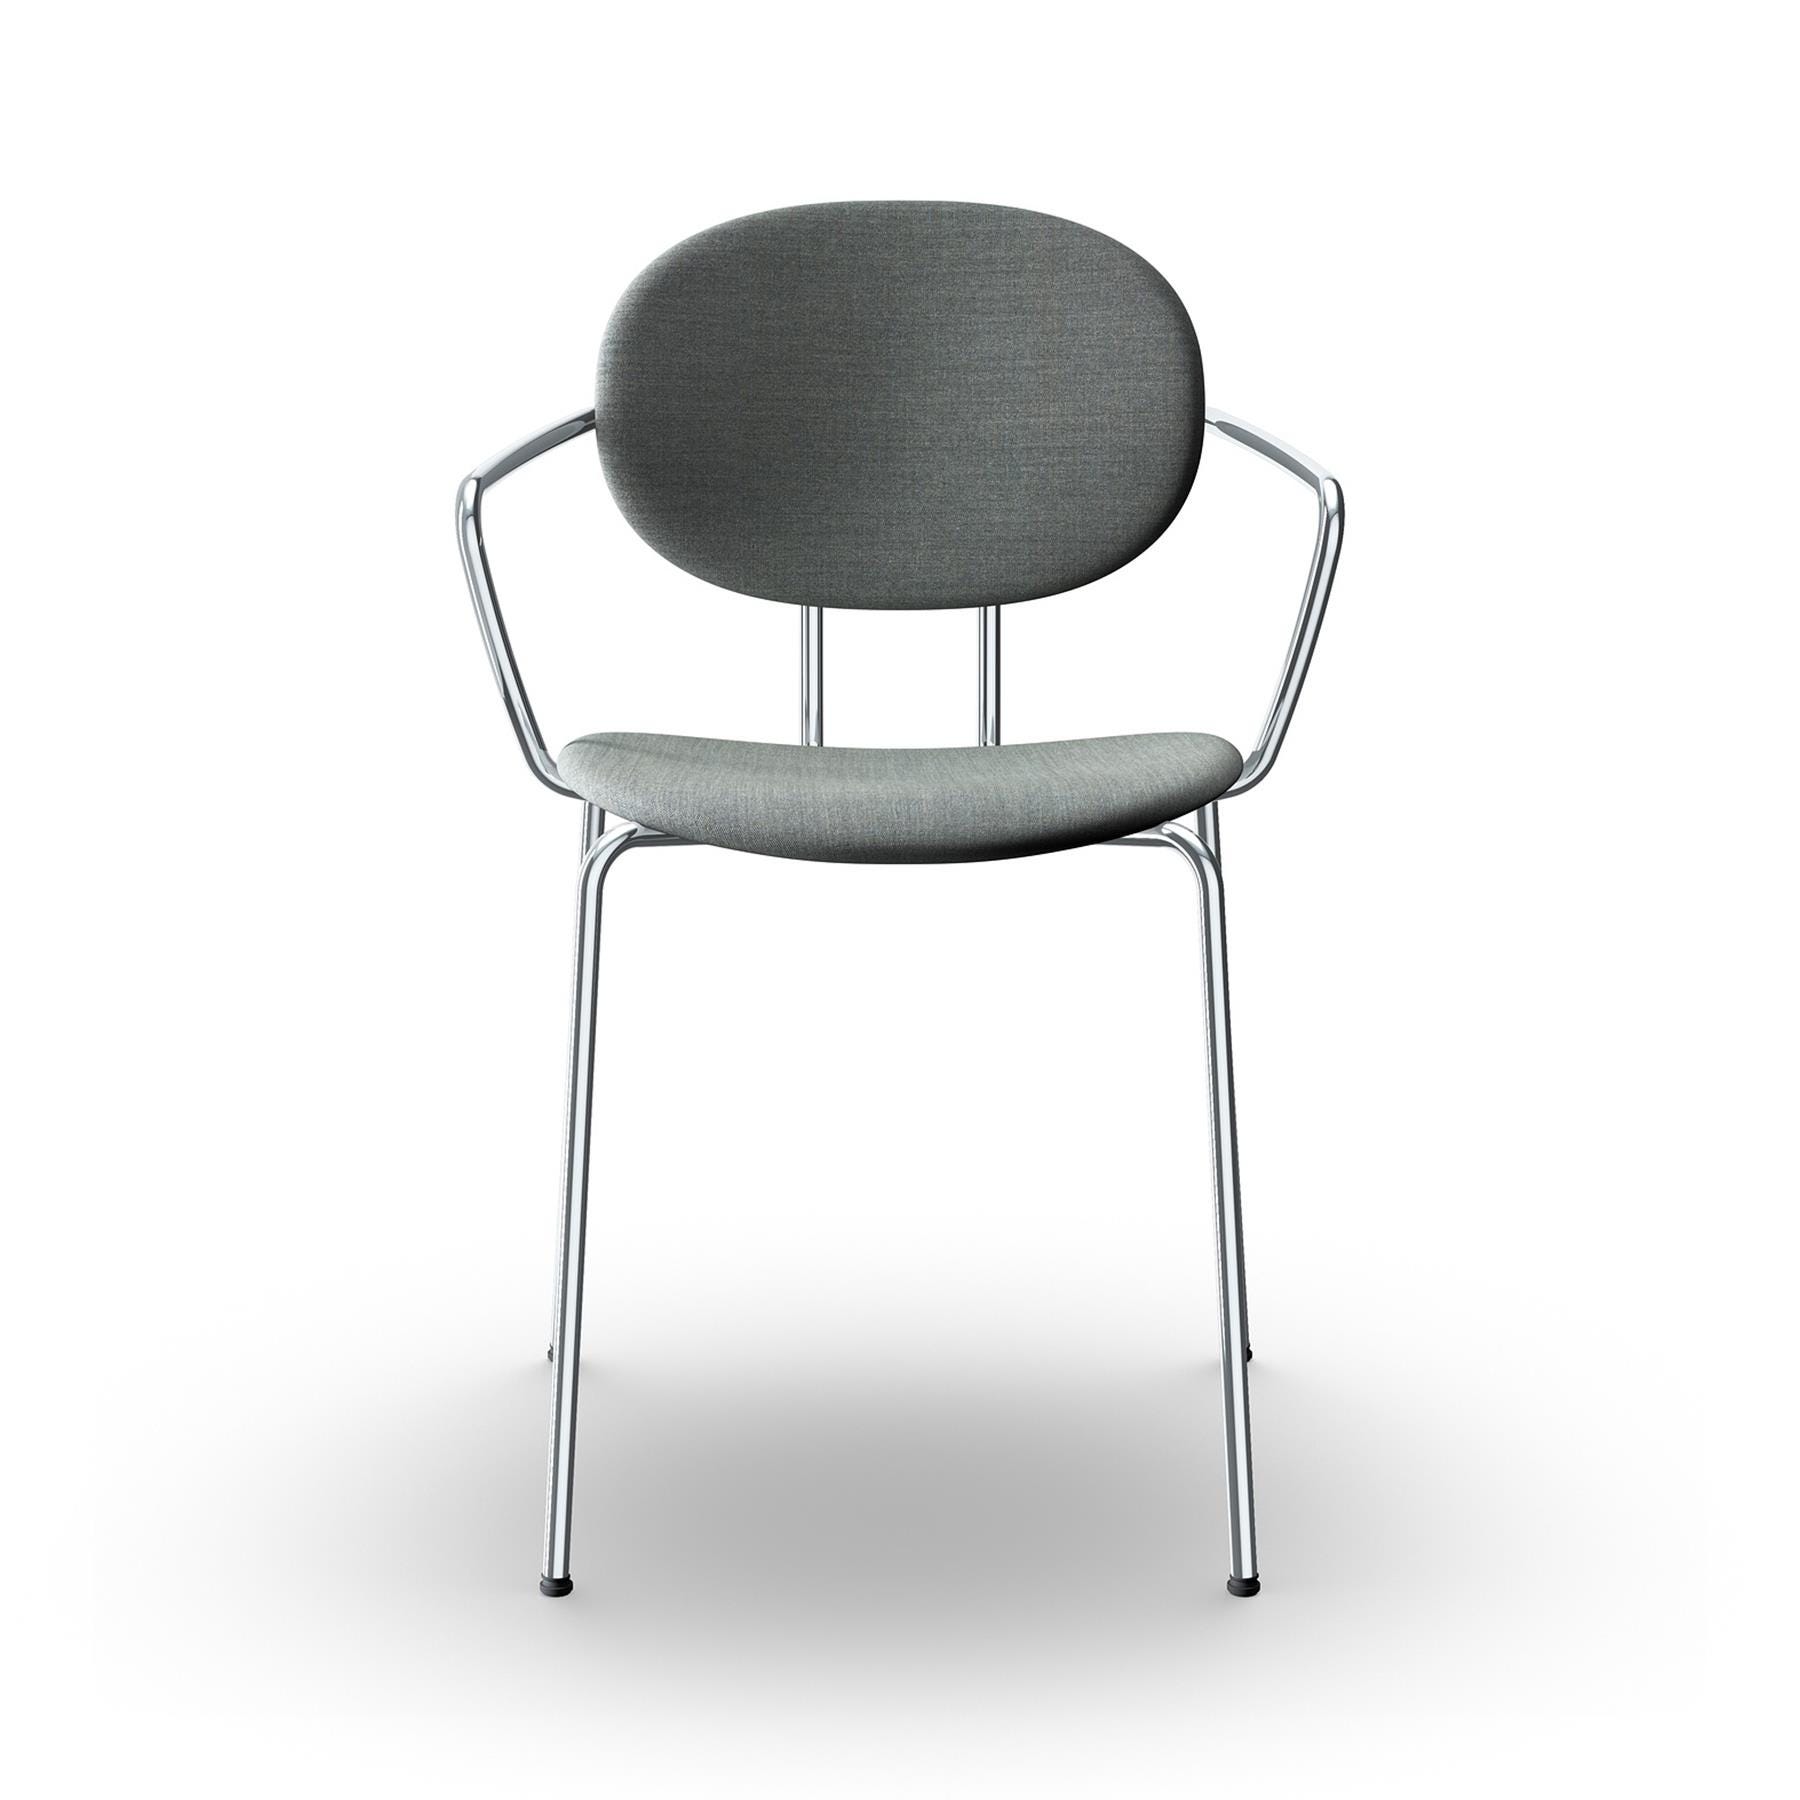 Sibast Piet Hein Dining Chair Fully Upholstered With Arms Chrome Remix 133 Grey Designer Furniture From Holloways Of Ludlow